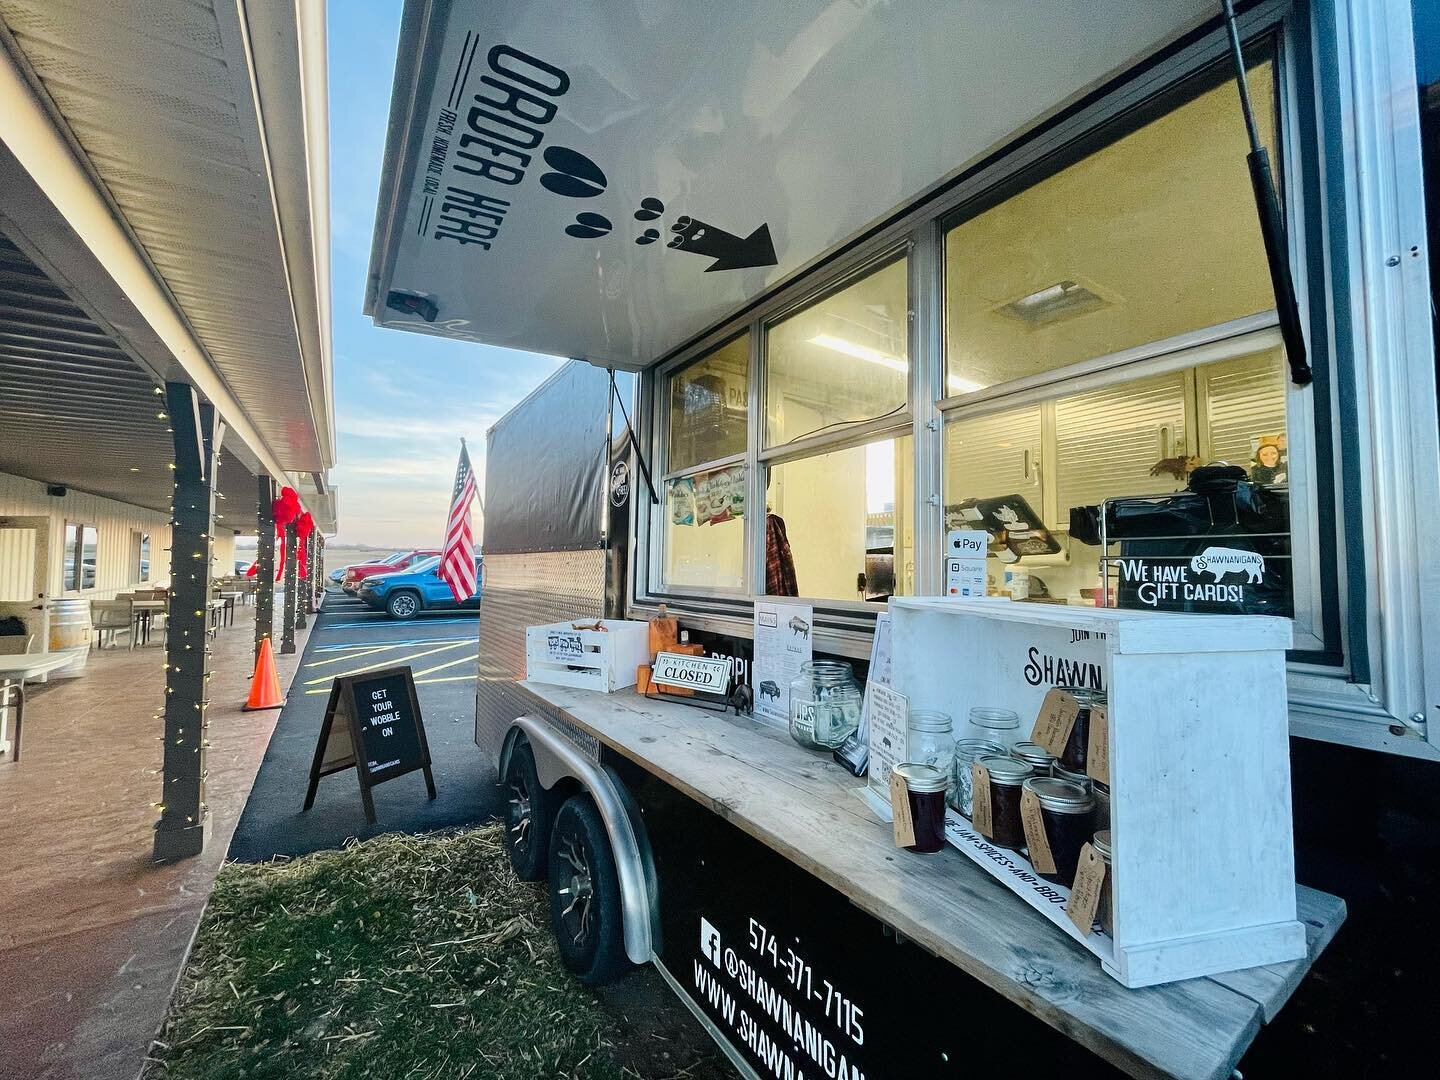 The mobile kitchen is OPEN at Tippy Creek Winery&rsquo;s Wobble Before You Gobble!! 

Come take advantage of wine sales and get some good food that you don&rsquo;t have to cook! We&rsquo;re here until 9pm 

Bring a toy for Toys For Tots and get 10% o